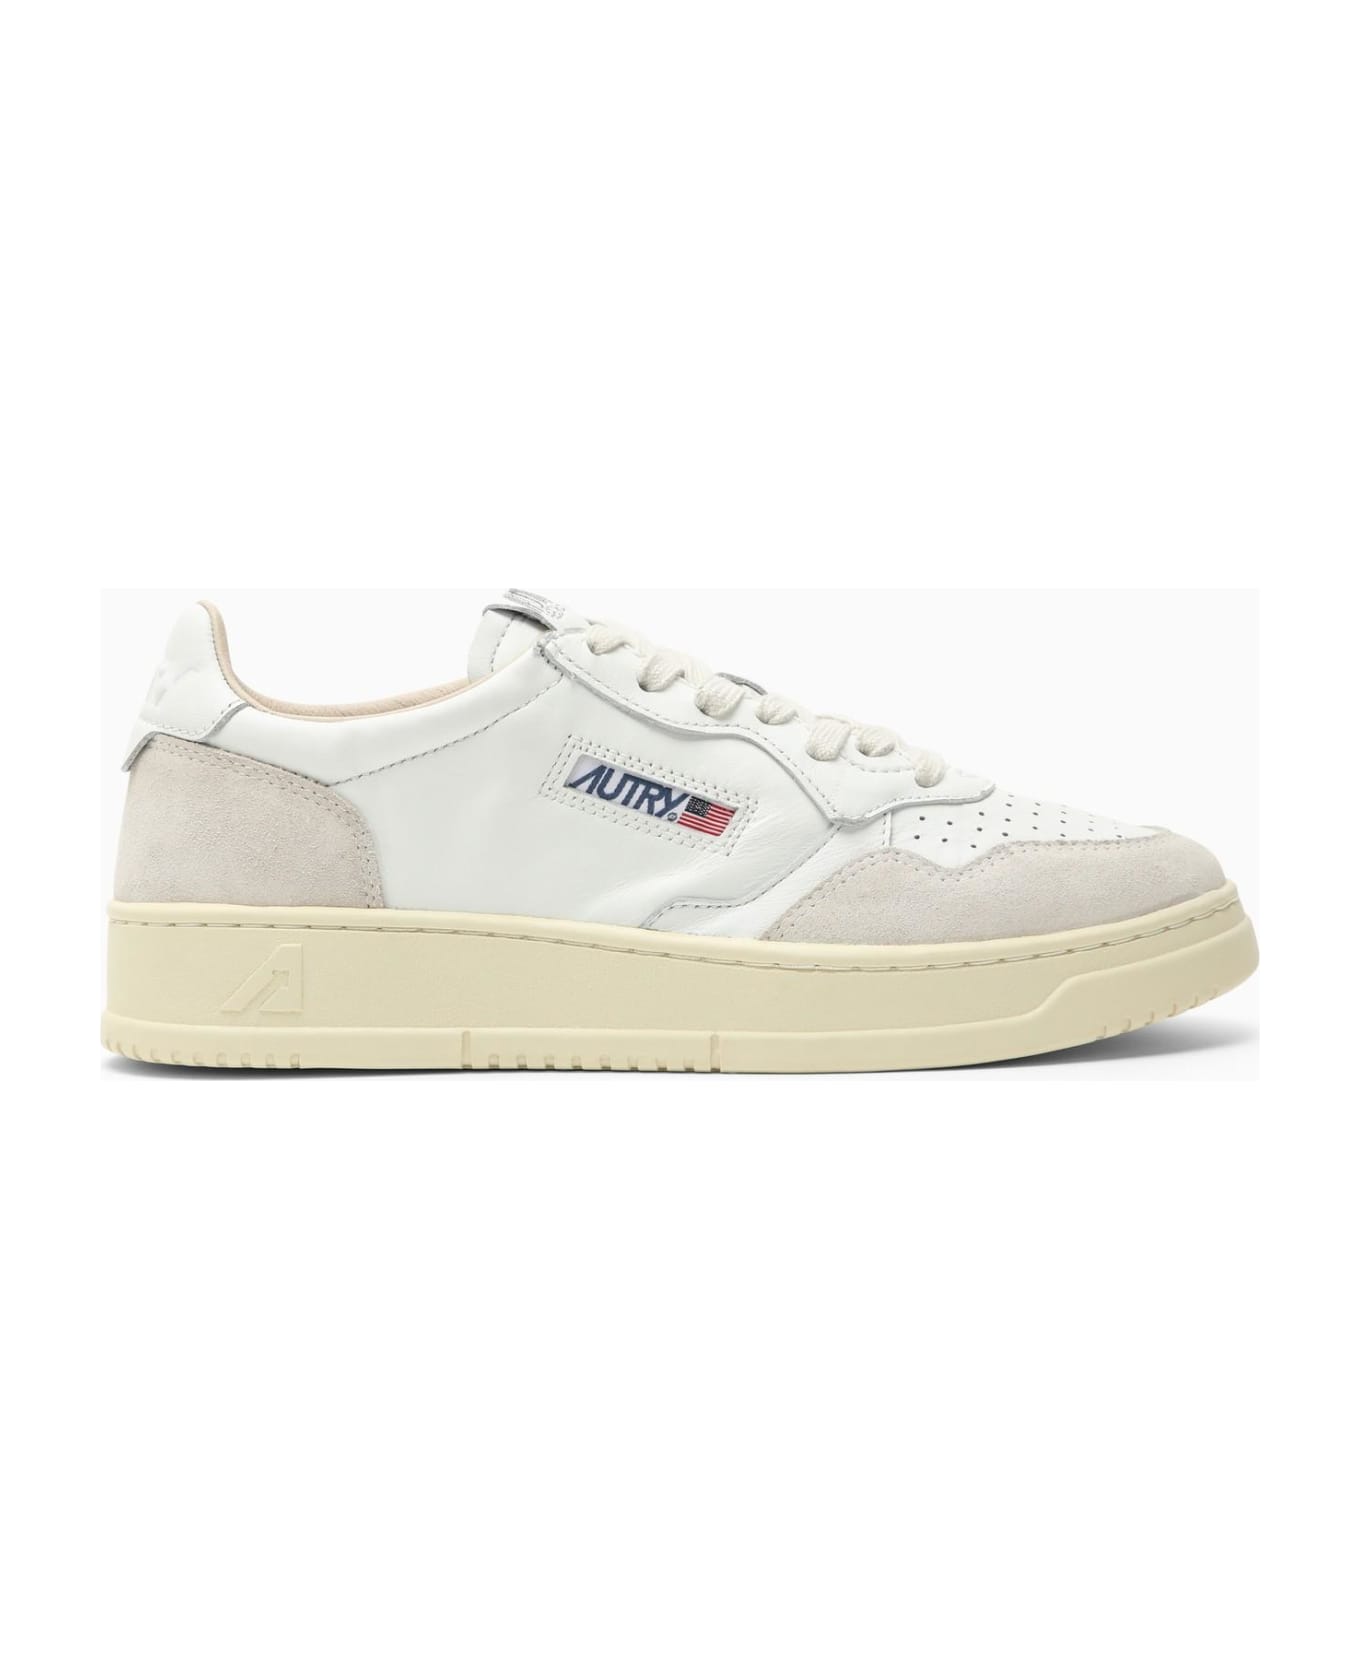 Autry Medalist Trainer In White Leather And Suede - White